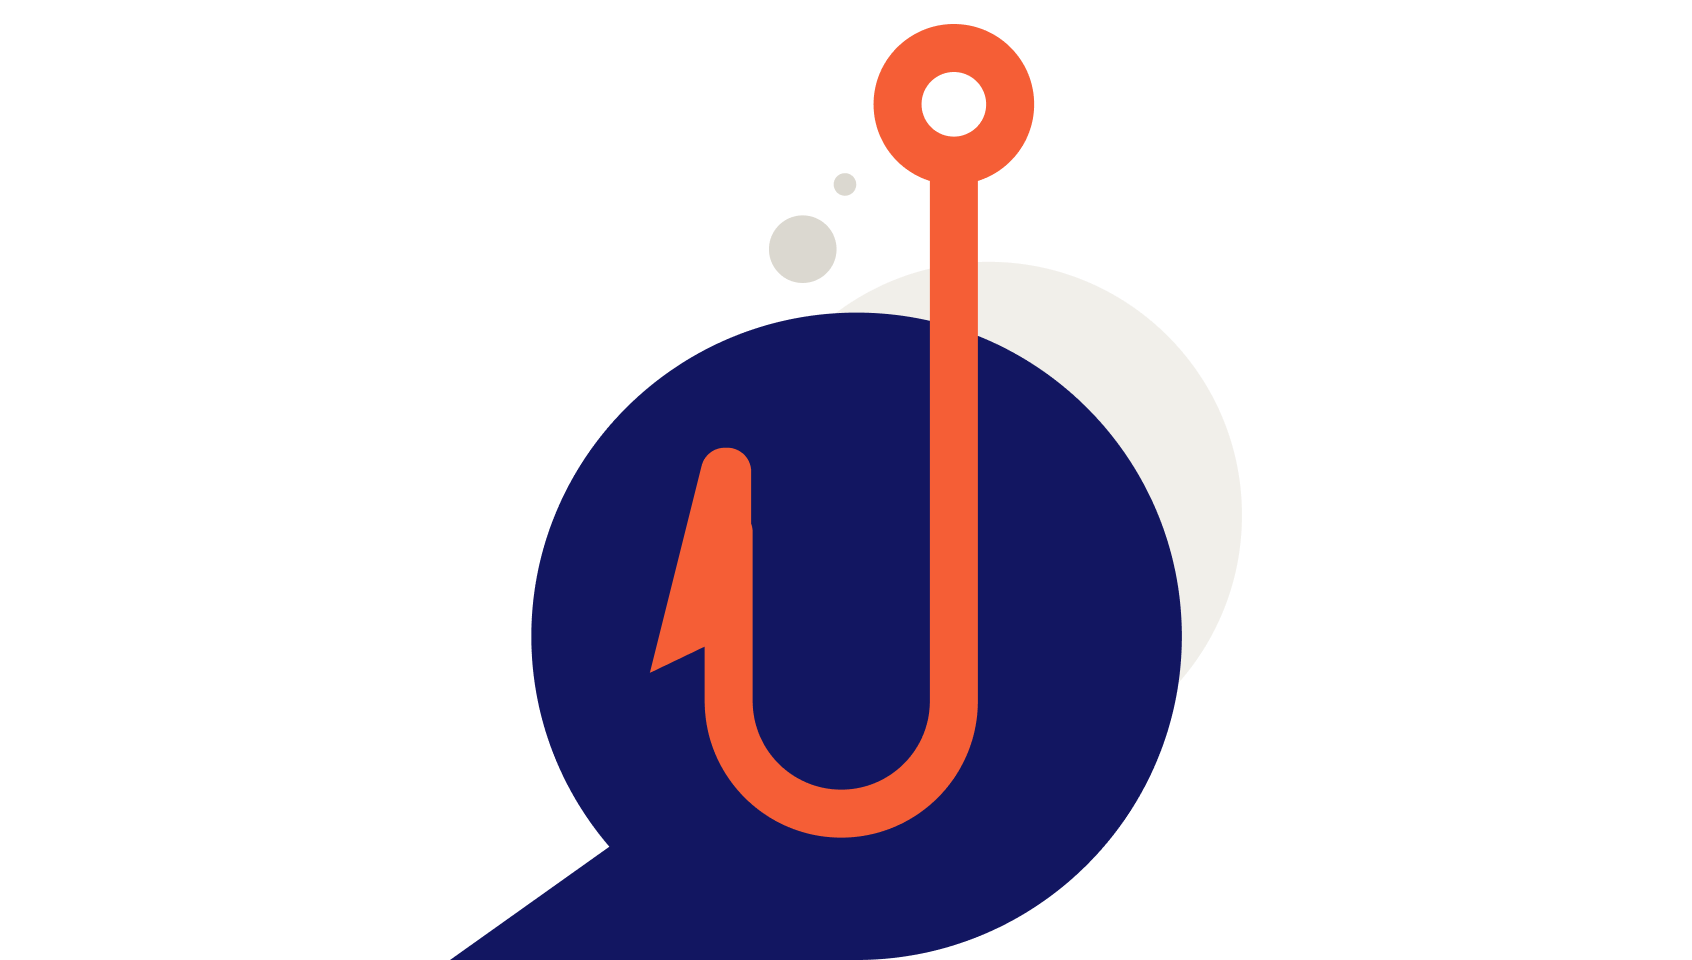 An illustration of a fish hook inside a message bubble that represents a phishing message